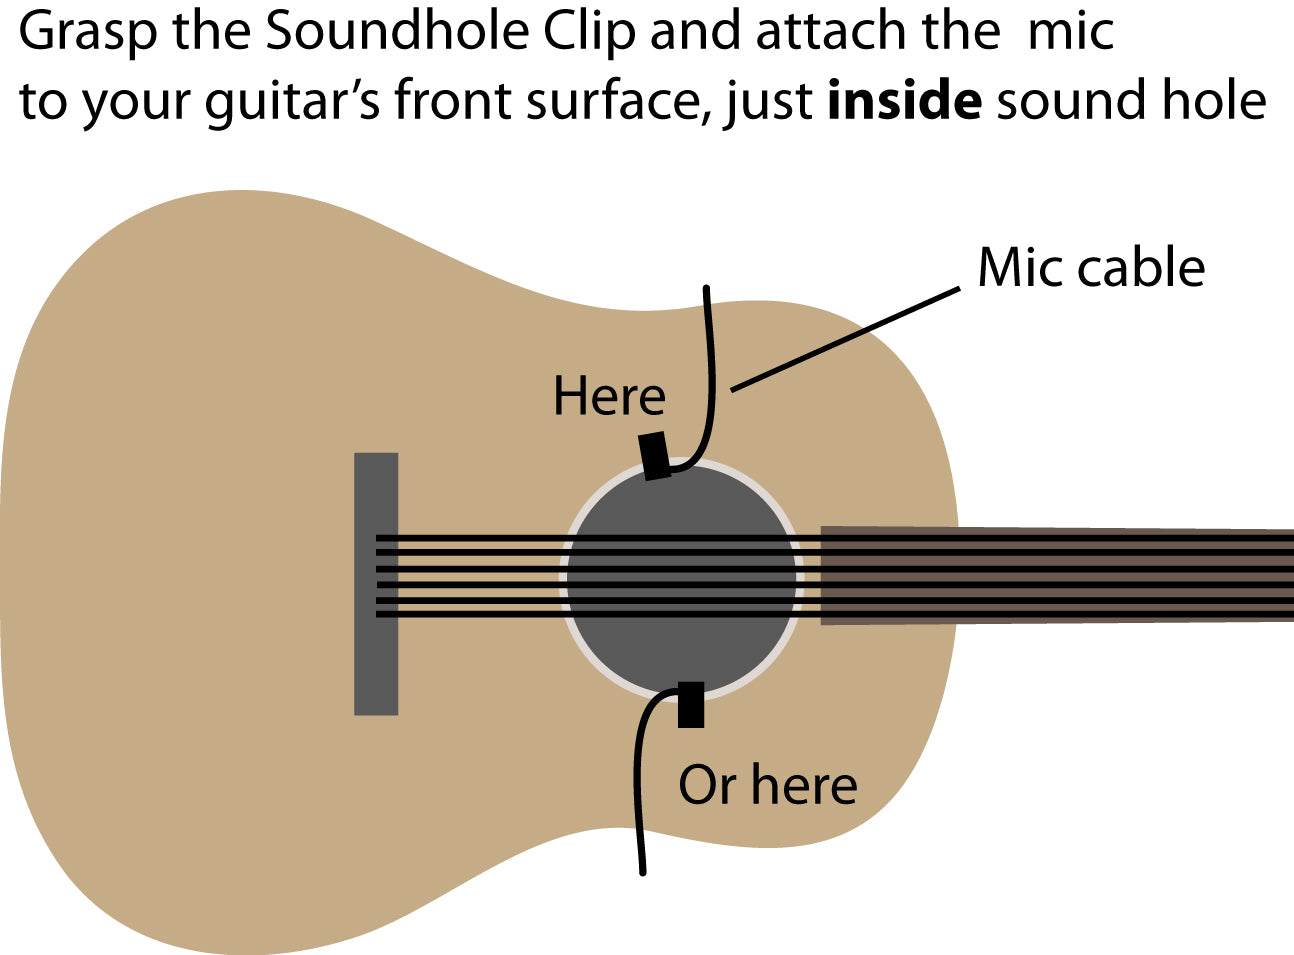 How to mount a Bartlett Guitar Mic B on an acoustic guitar